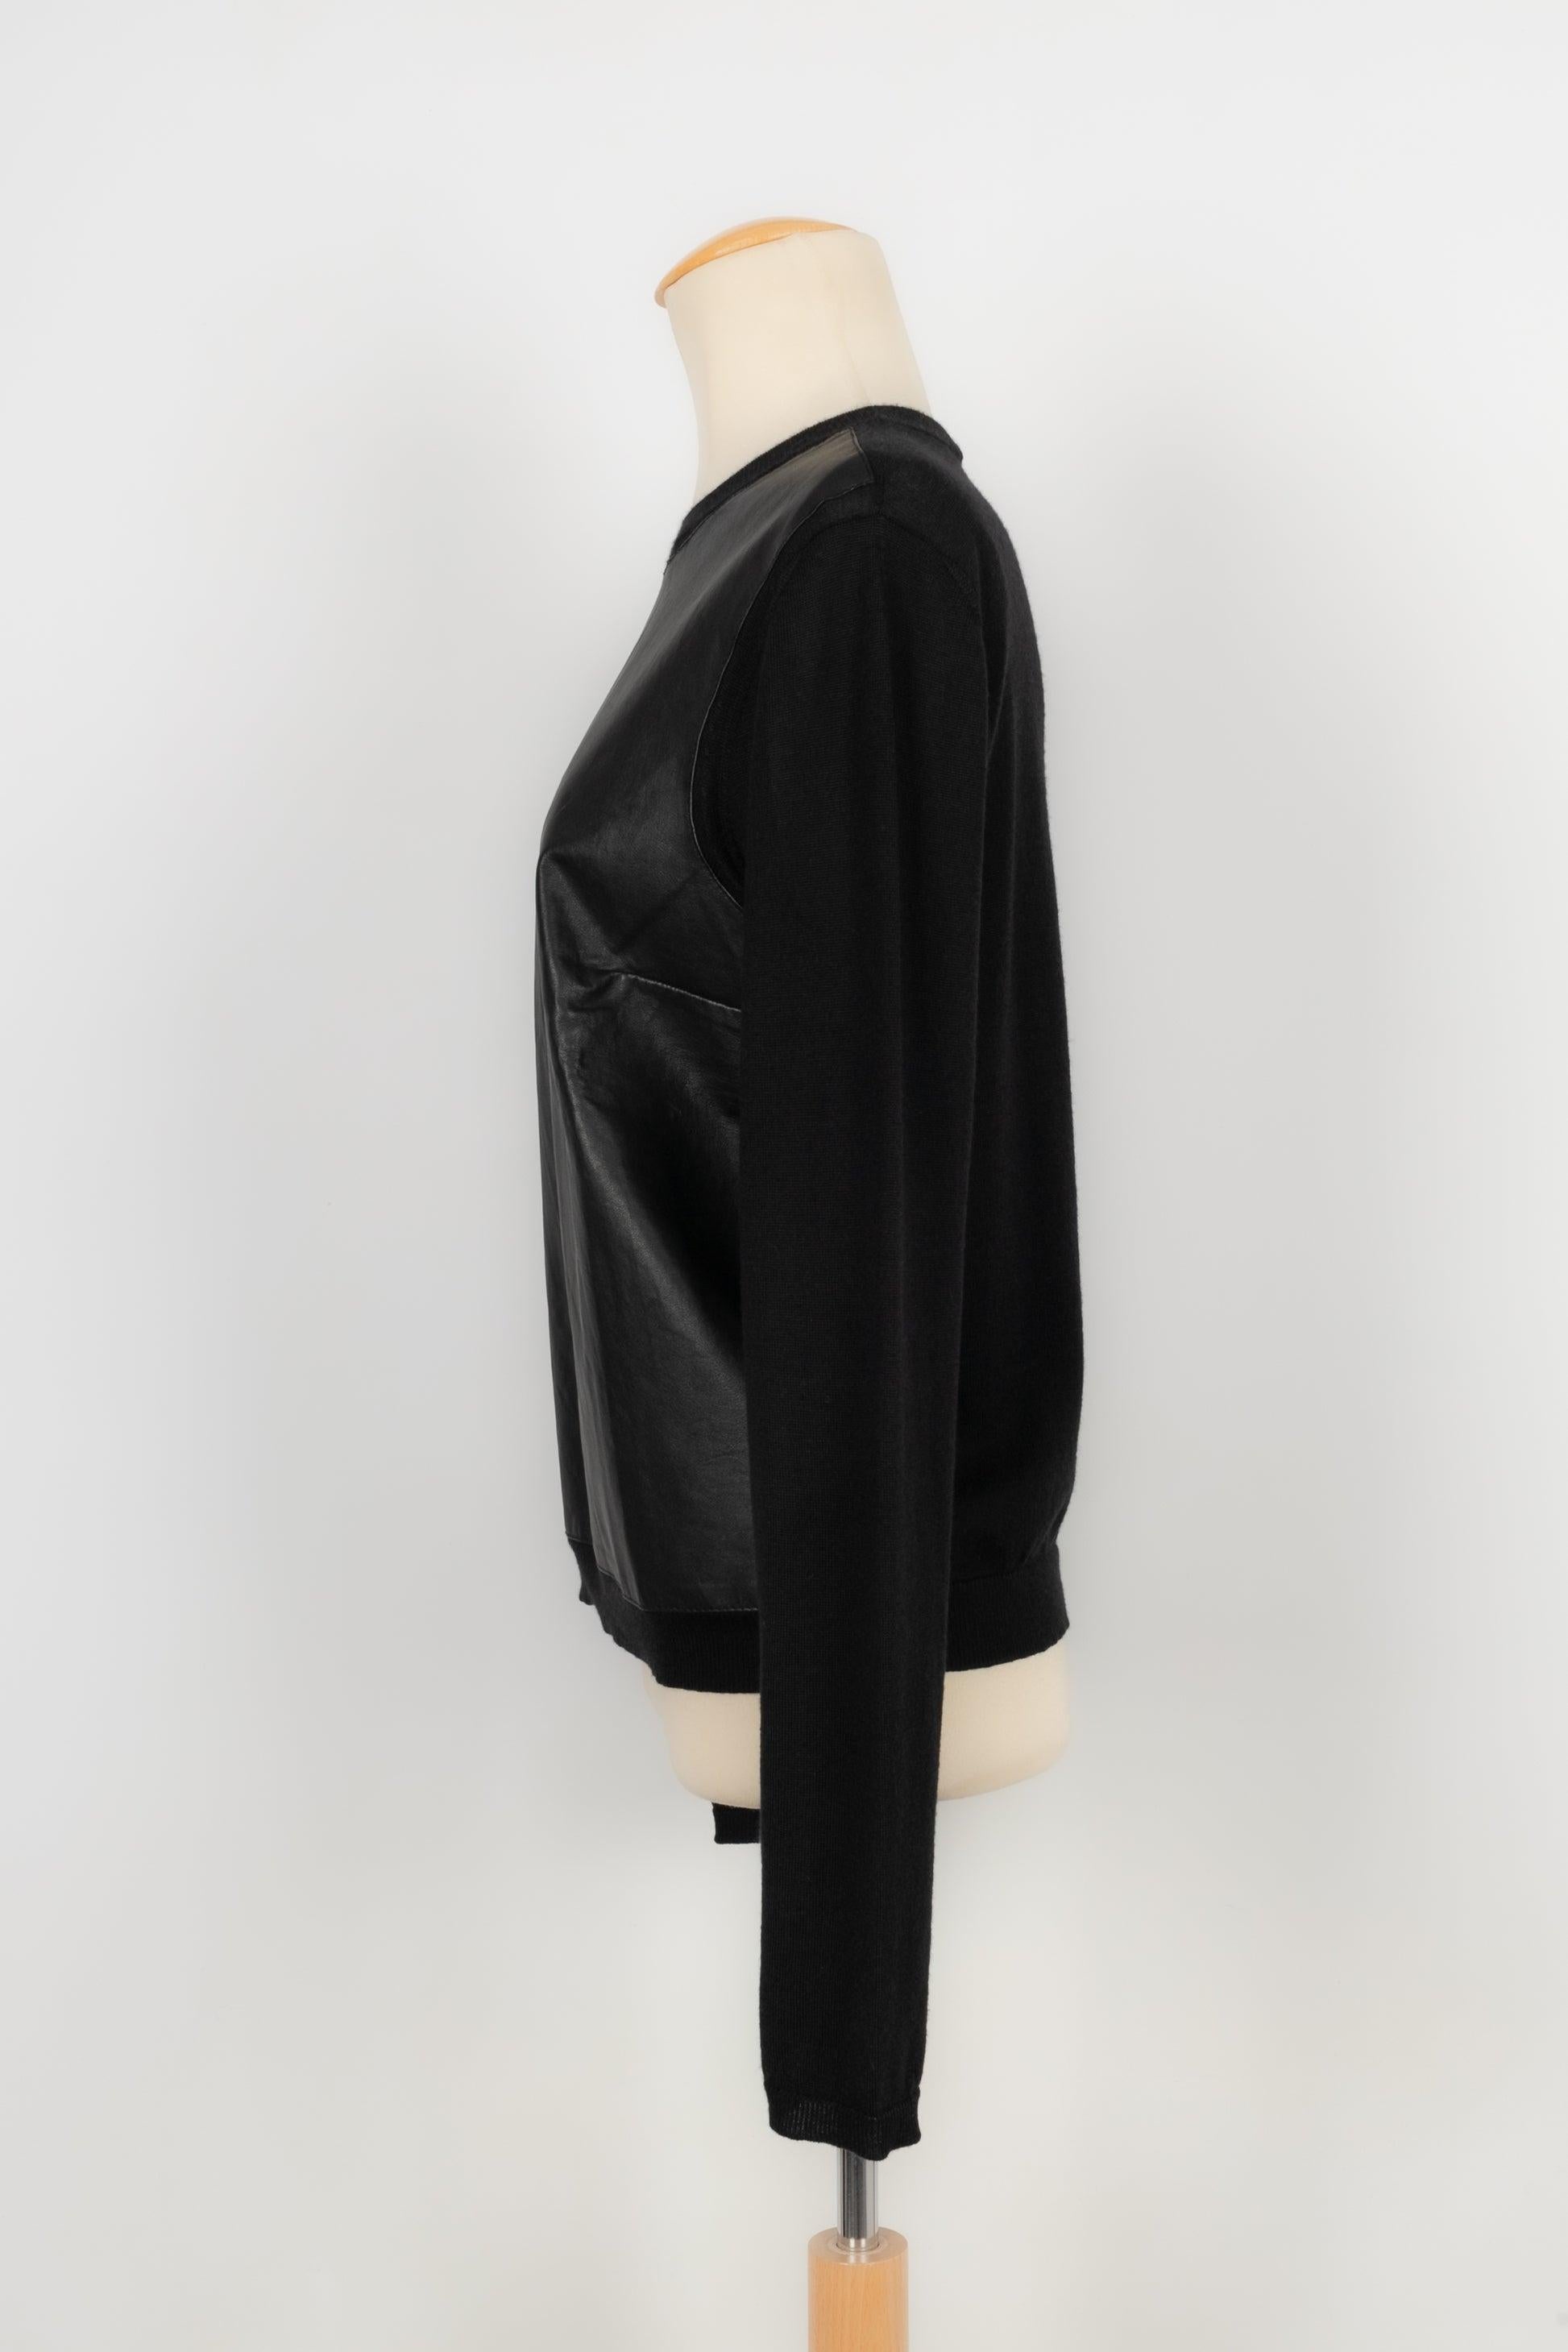 Christian Dior Black Lambskin and Cashmere Long-Sleeved Top 42FR For Sale 1